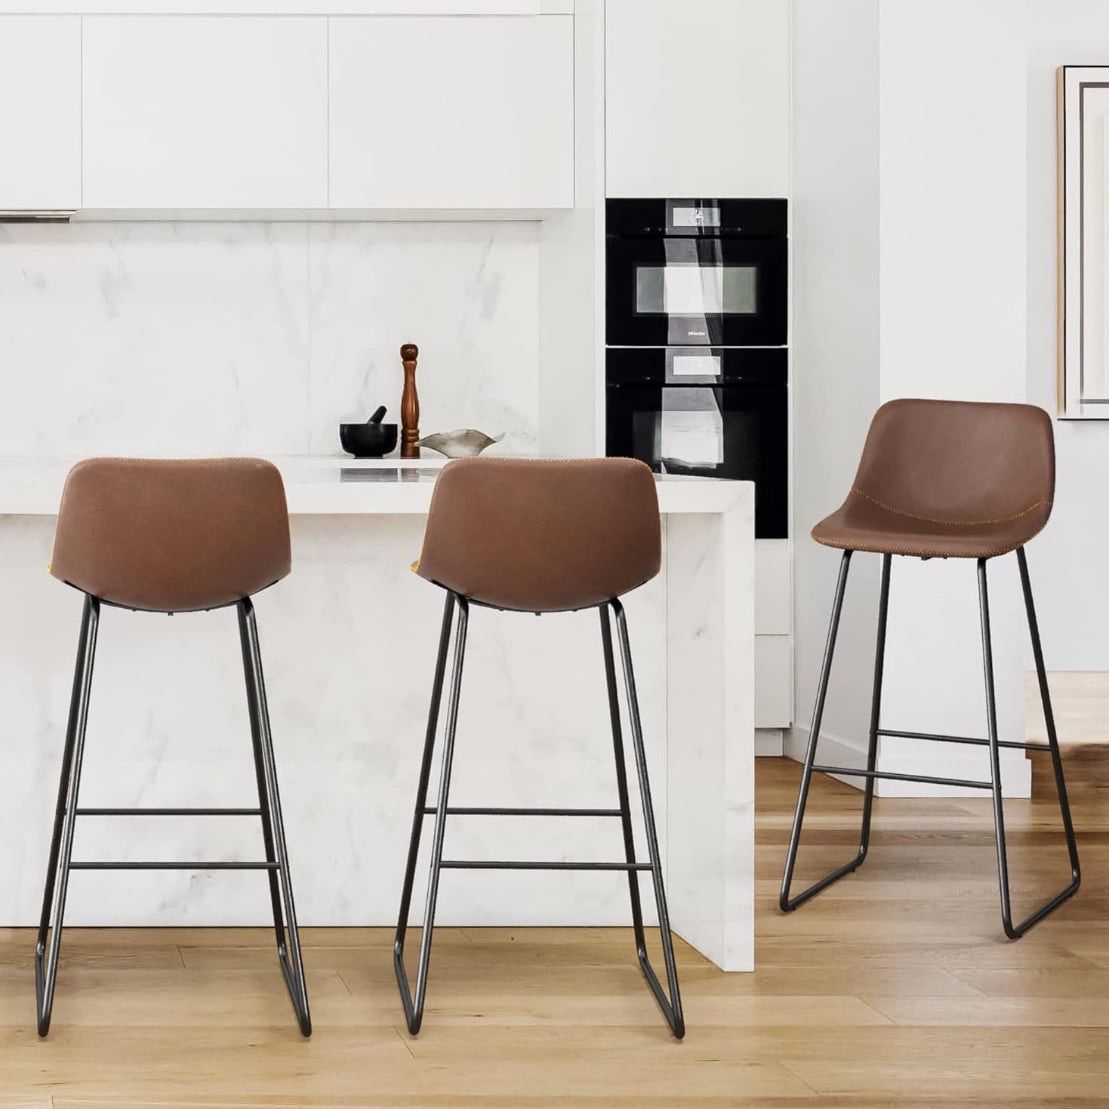 Reduced - Bar Stools Set of 3, 30" ALX Faux Leather Barstools, Modern Counter Height Stools with Back and Metal Legs, Armless Counter Chairs for Kitch